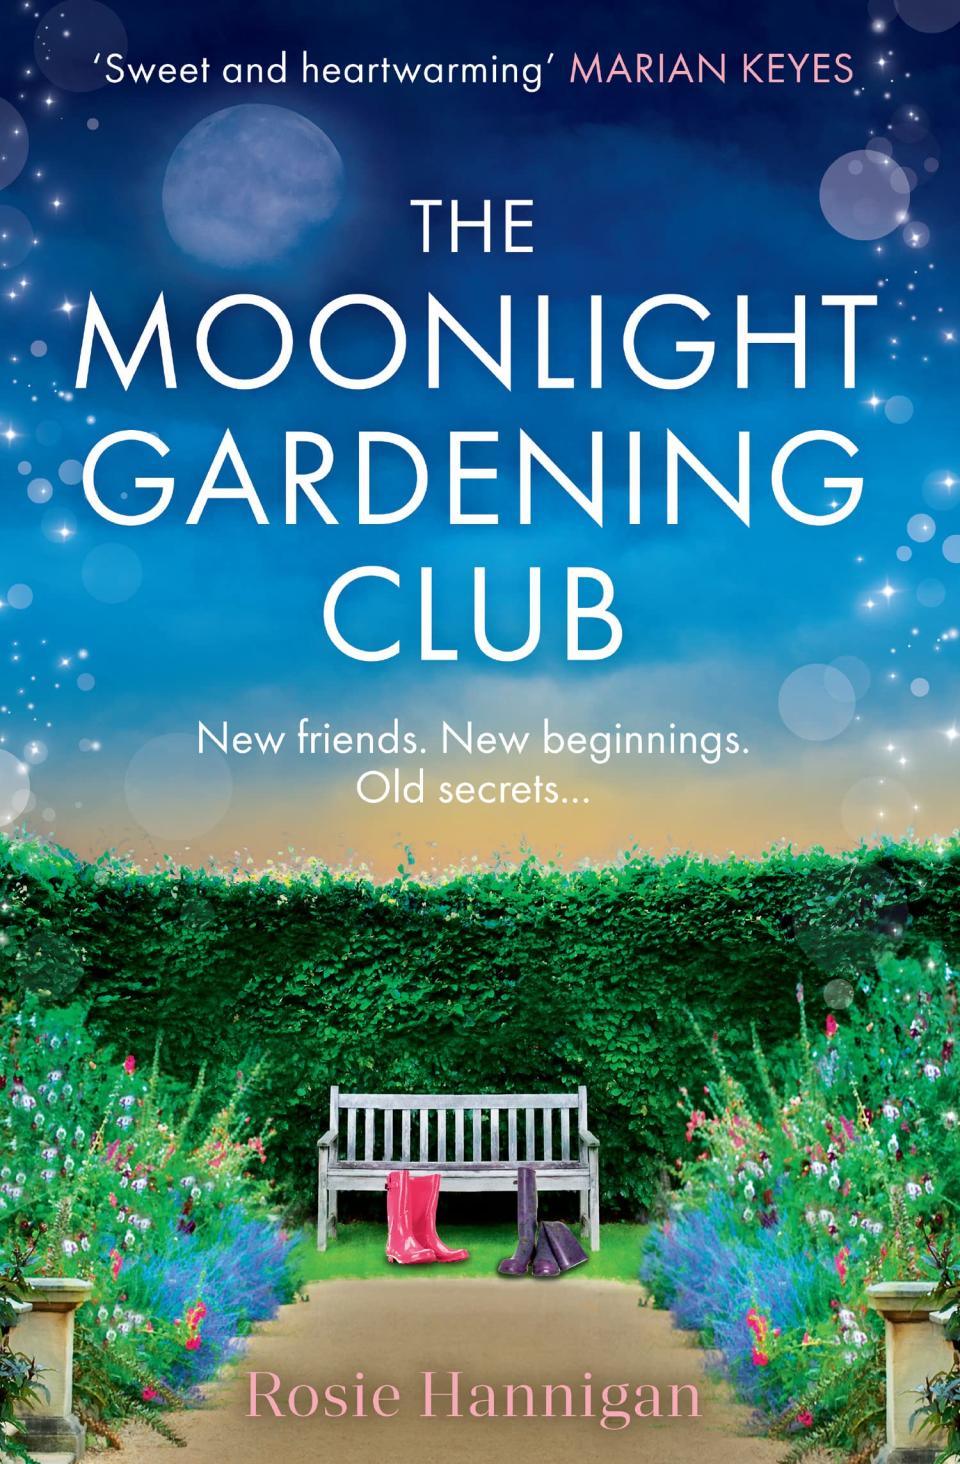 The Moonlight Gardening Club by Rosie Hannigan book cover